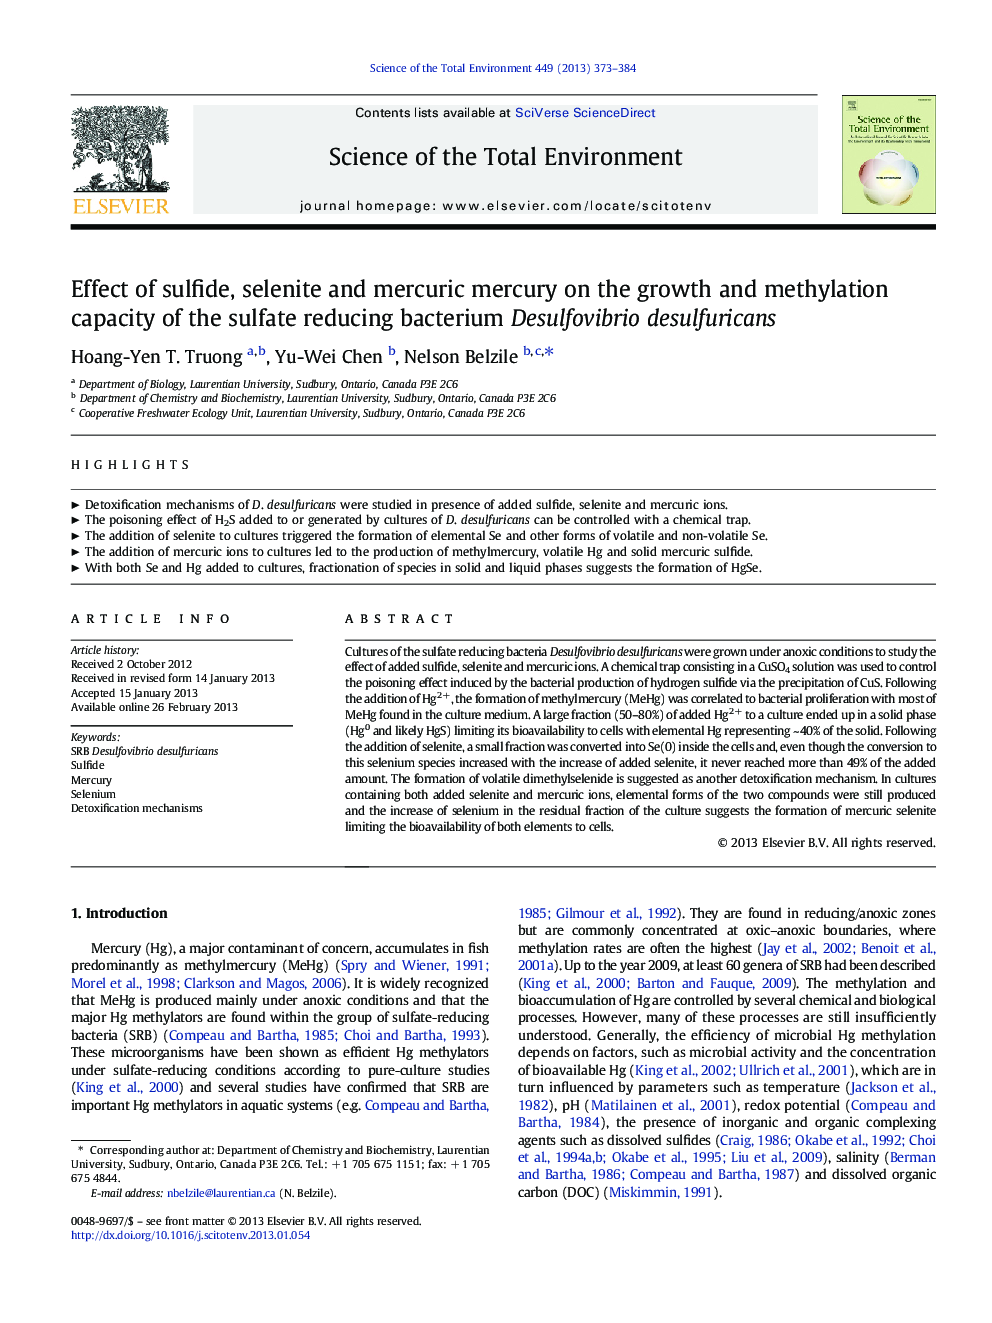 Effect of sulfide, selenite and mercuric mercury on the growth and methylation capacity of the sulfate reducing bacterium Desulfovibrio desulfuricans